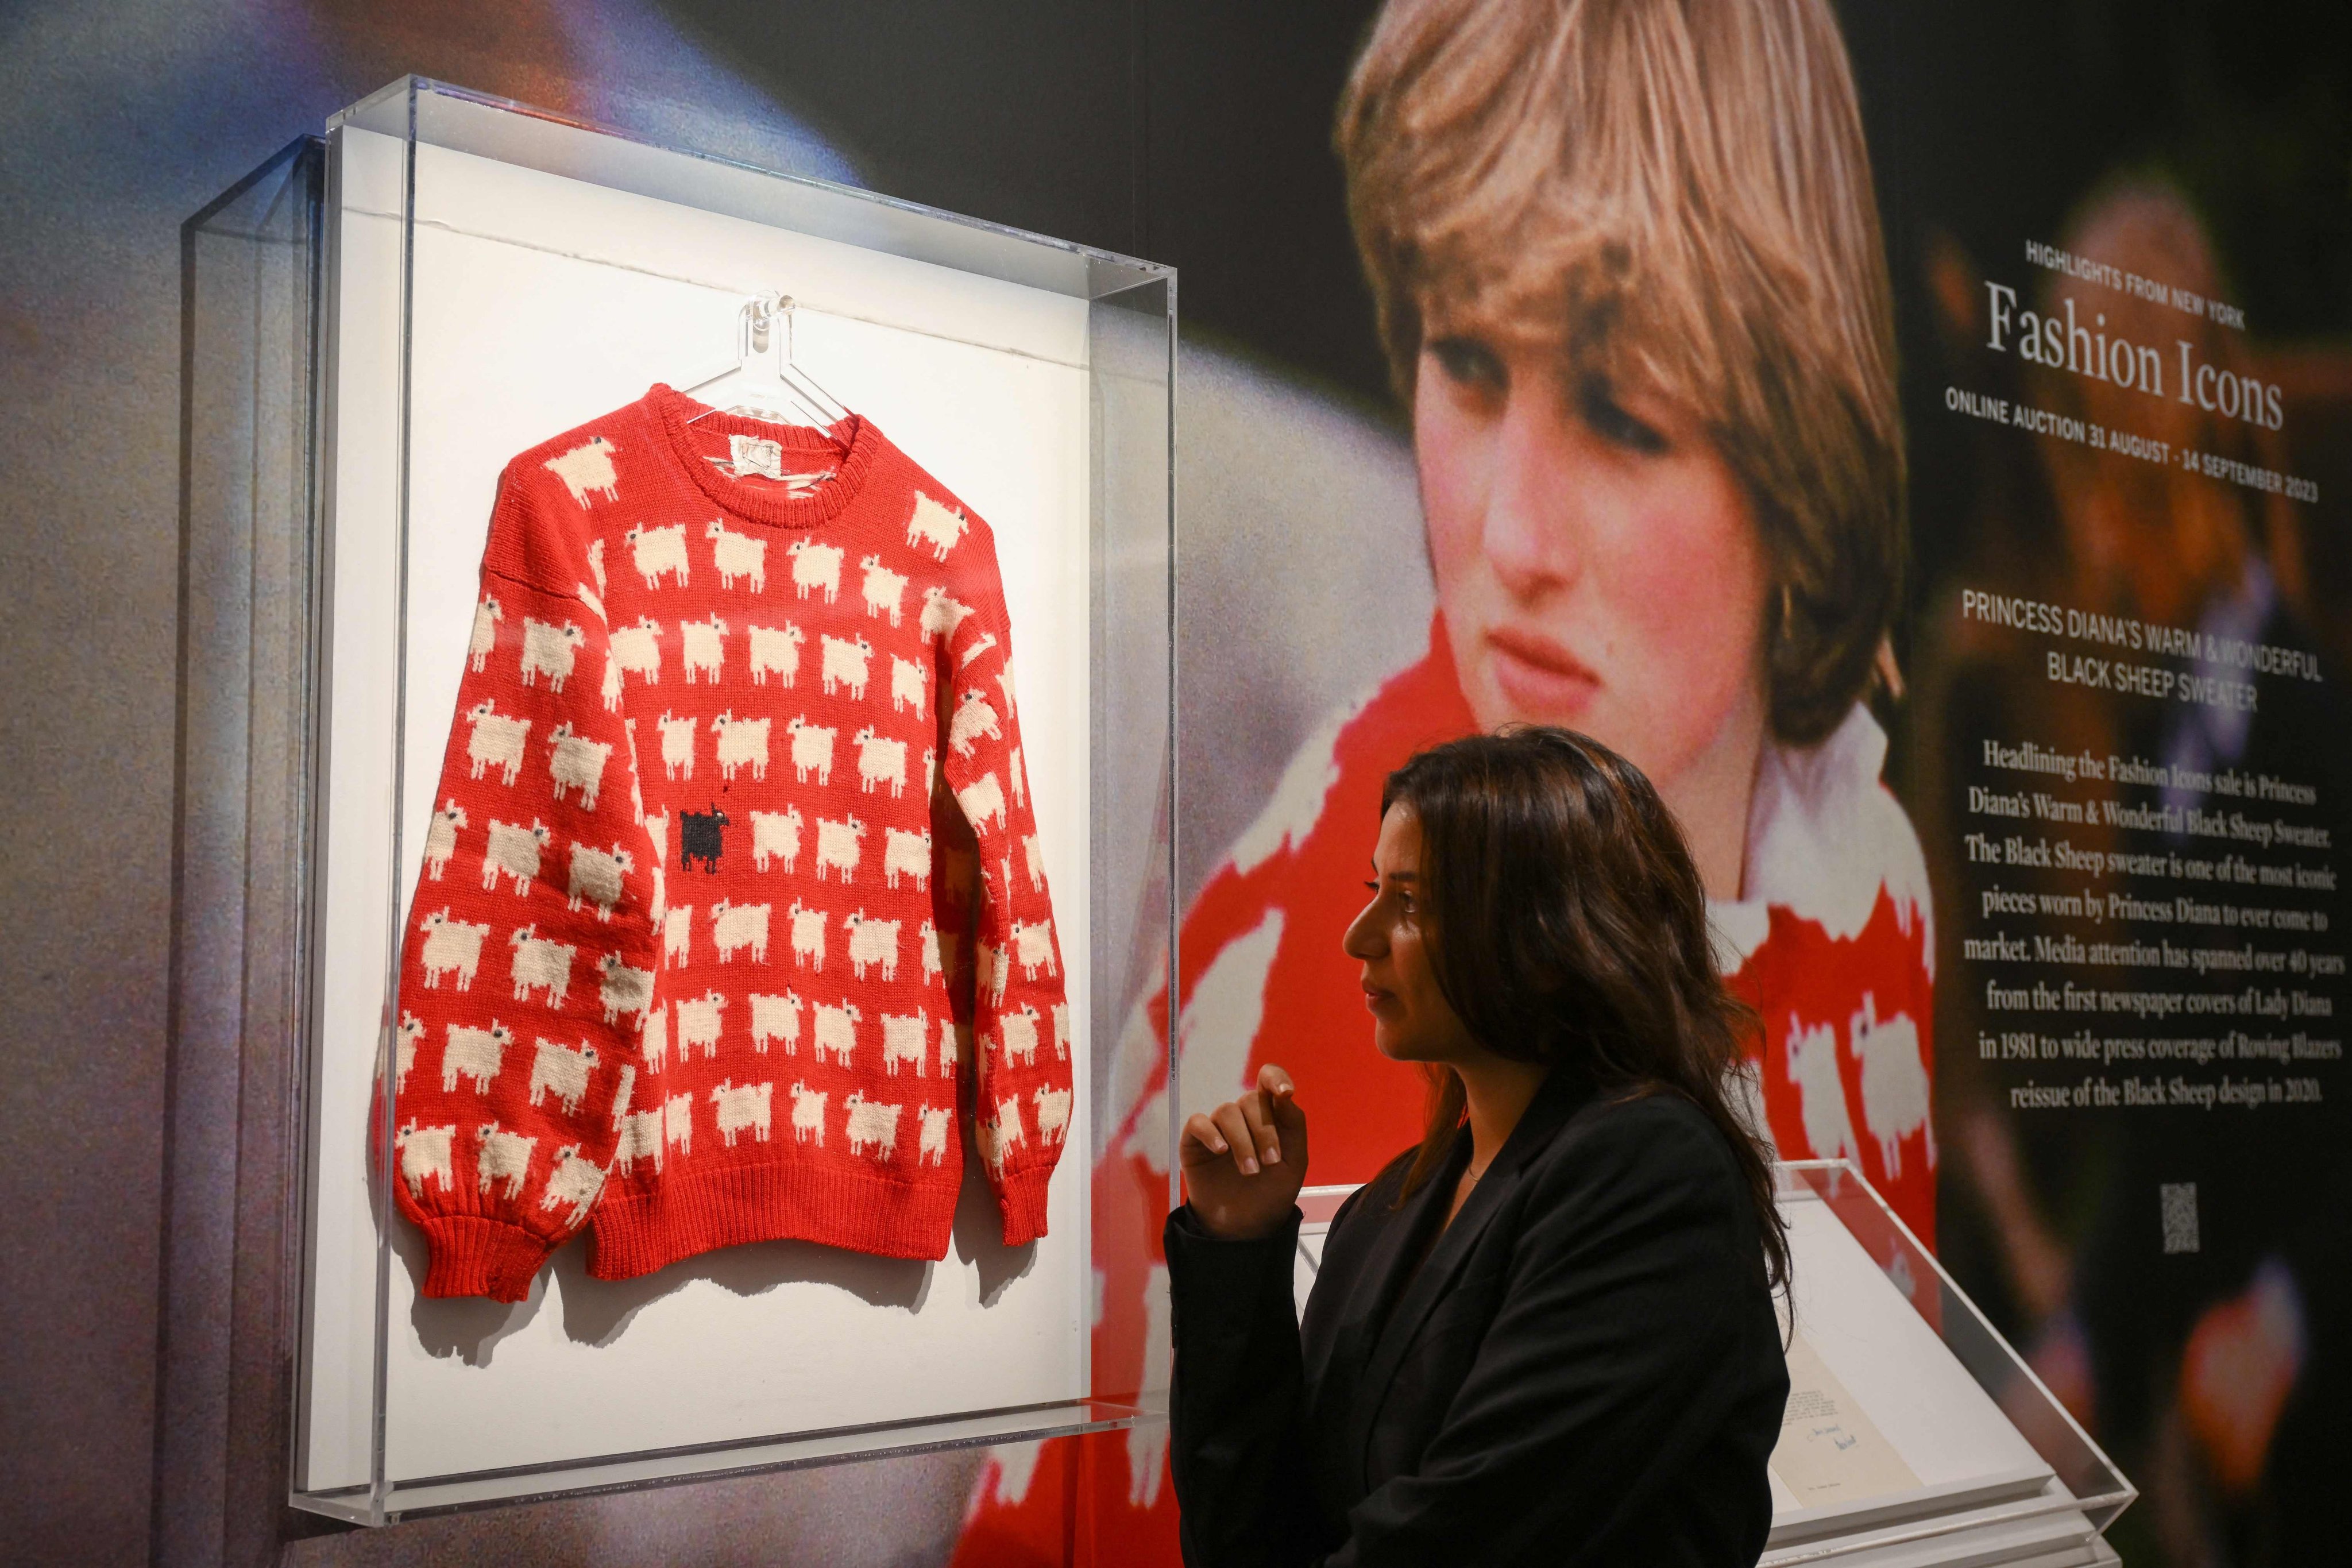 A staff member poses with Princess Diana’s “Black Sheep” jumper at Sotheby’s auction house in London in July. Photo: AFP